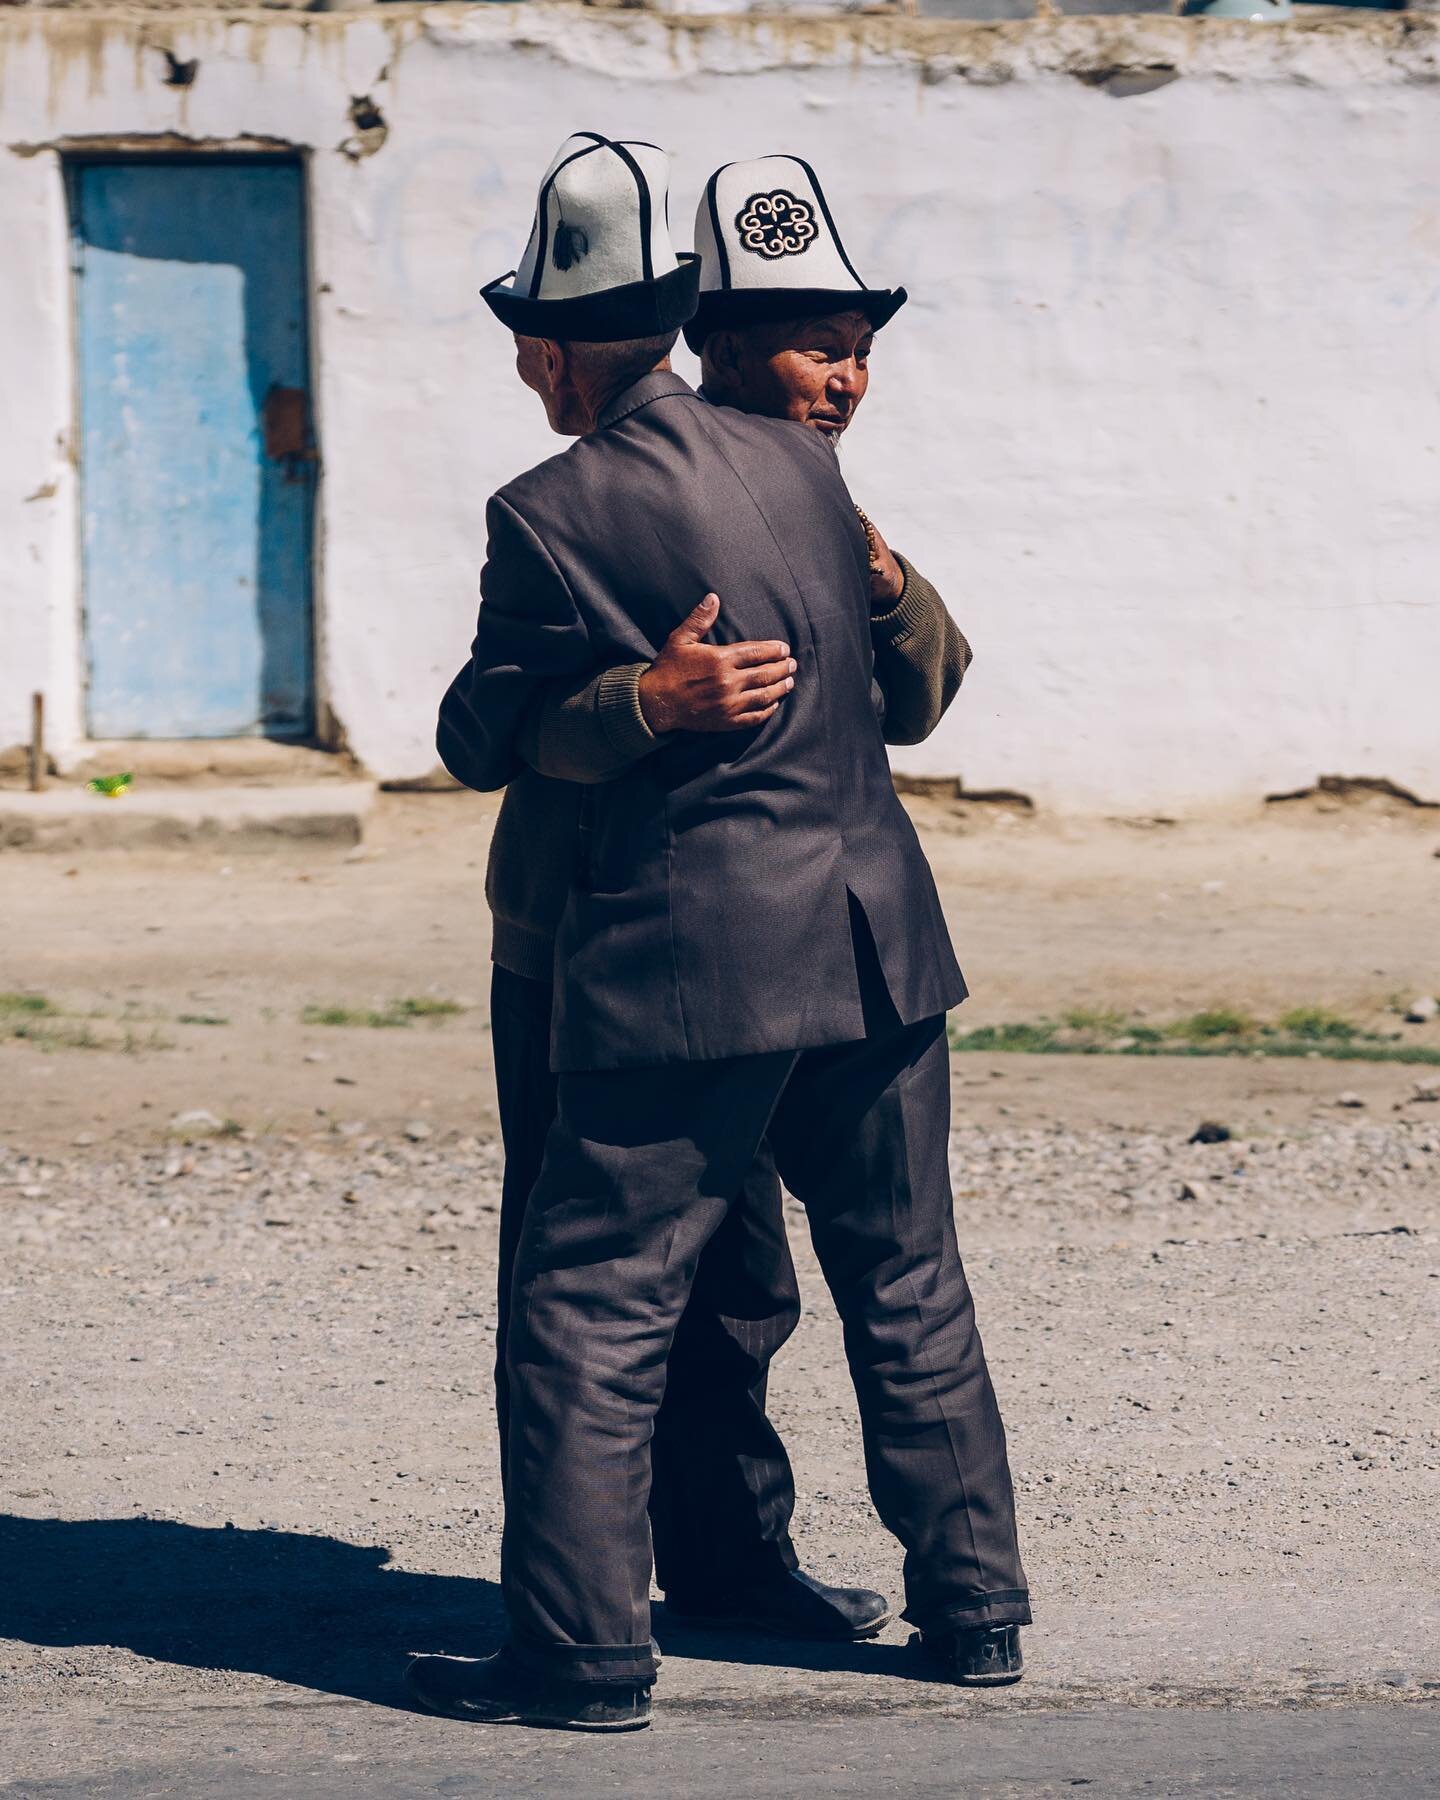 Two friends embrace on the streets of Murghab in eastern Tajikistan, the highest and probably the most remote town in the country. They both wear traditional kalpak hats suggesting they are Kyrgyz men. Semi nomadic communities from Kyrgyzstan will cr